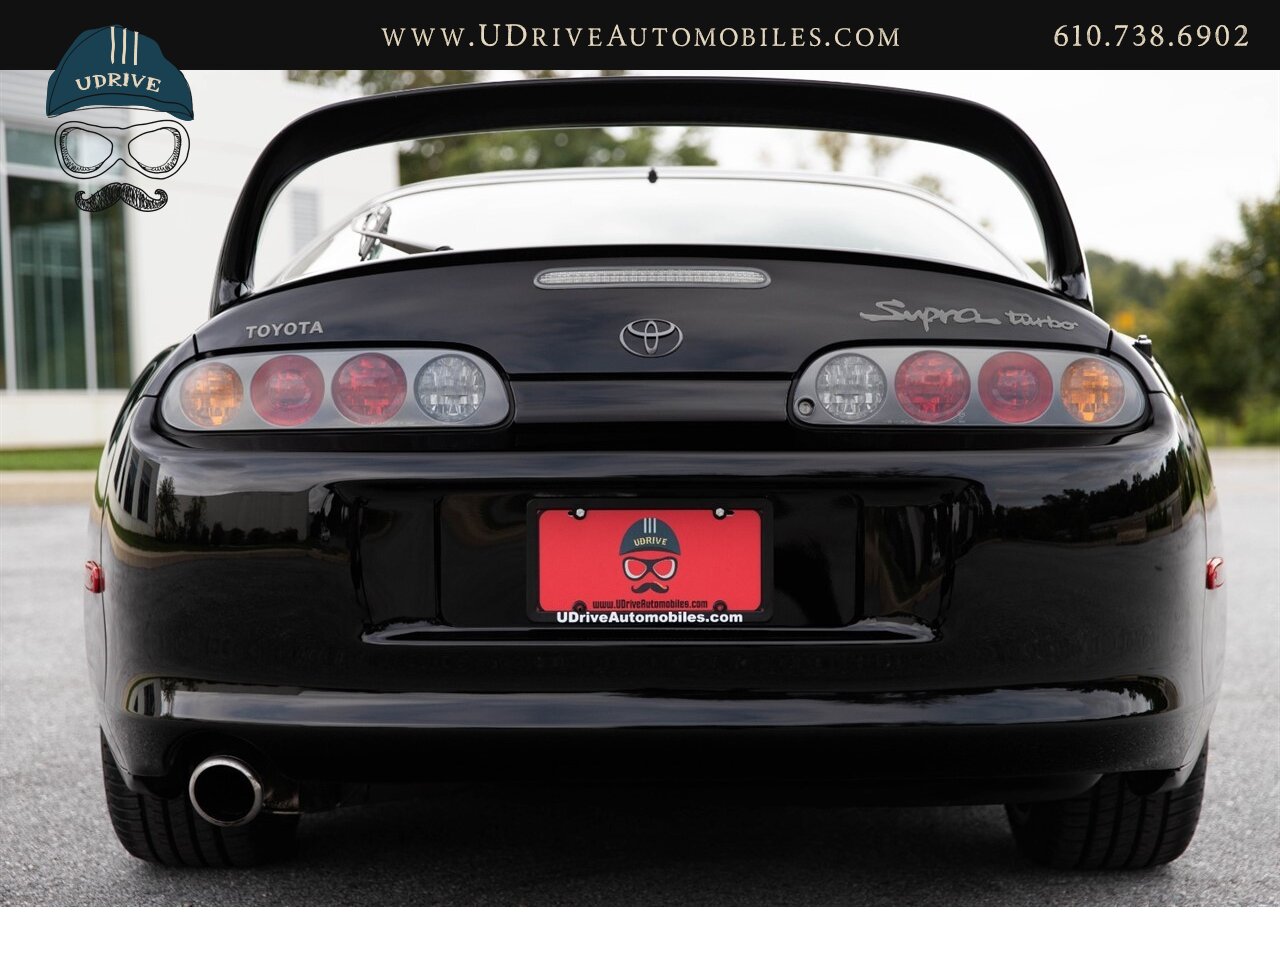 1997 Toyota Supra Turbo 6 Speed Manual 15th Anniversary Edition   - Photo 23 - West Chester, PA 19382